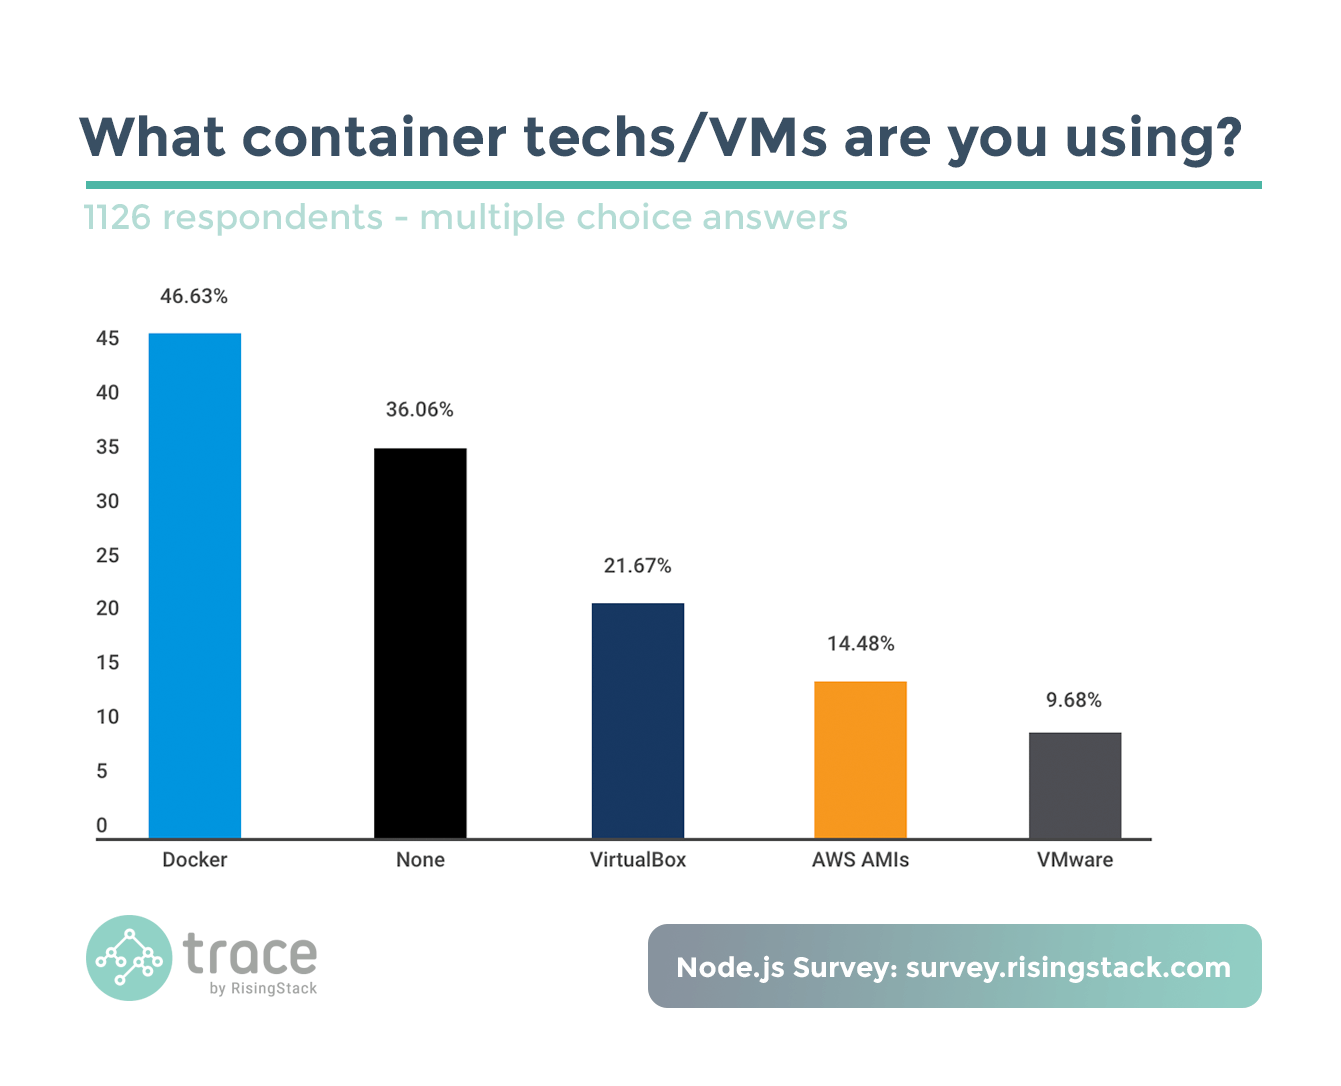 Node.js Survey - What container techs or VMs are you using? Docker.